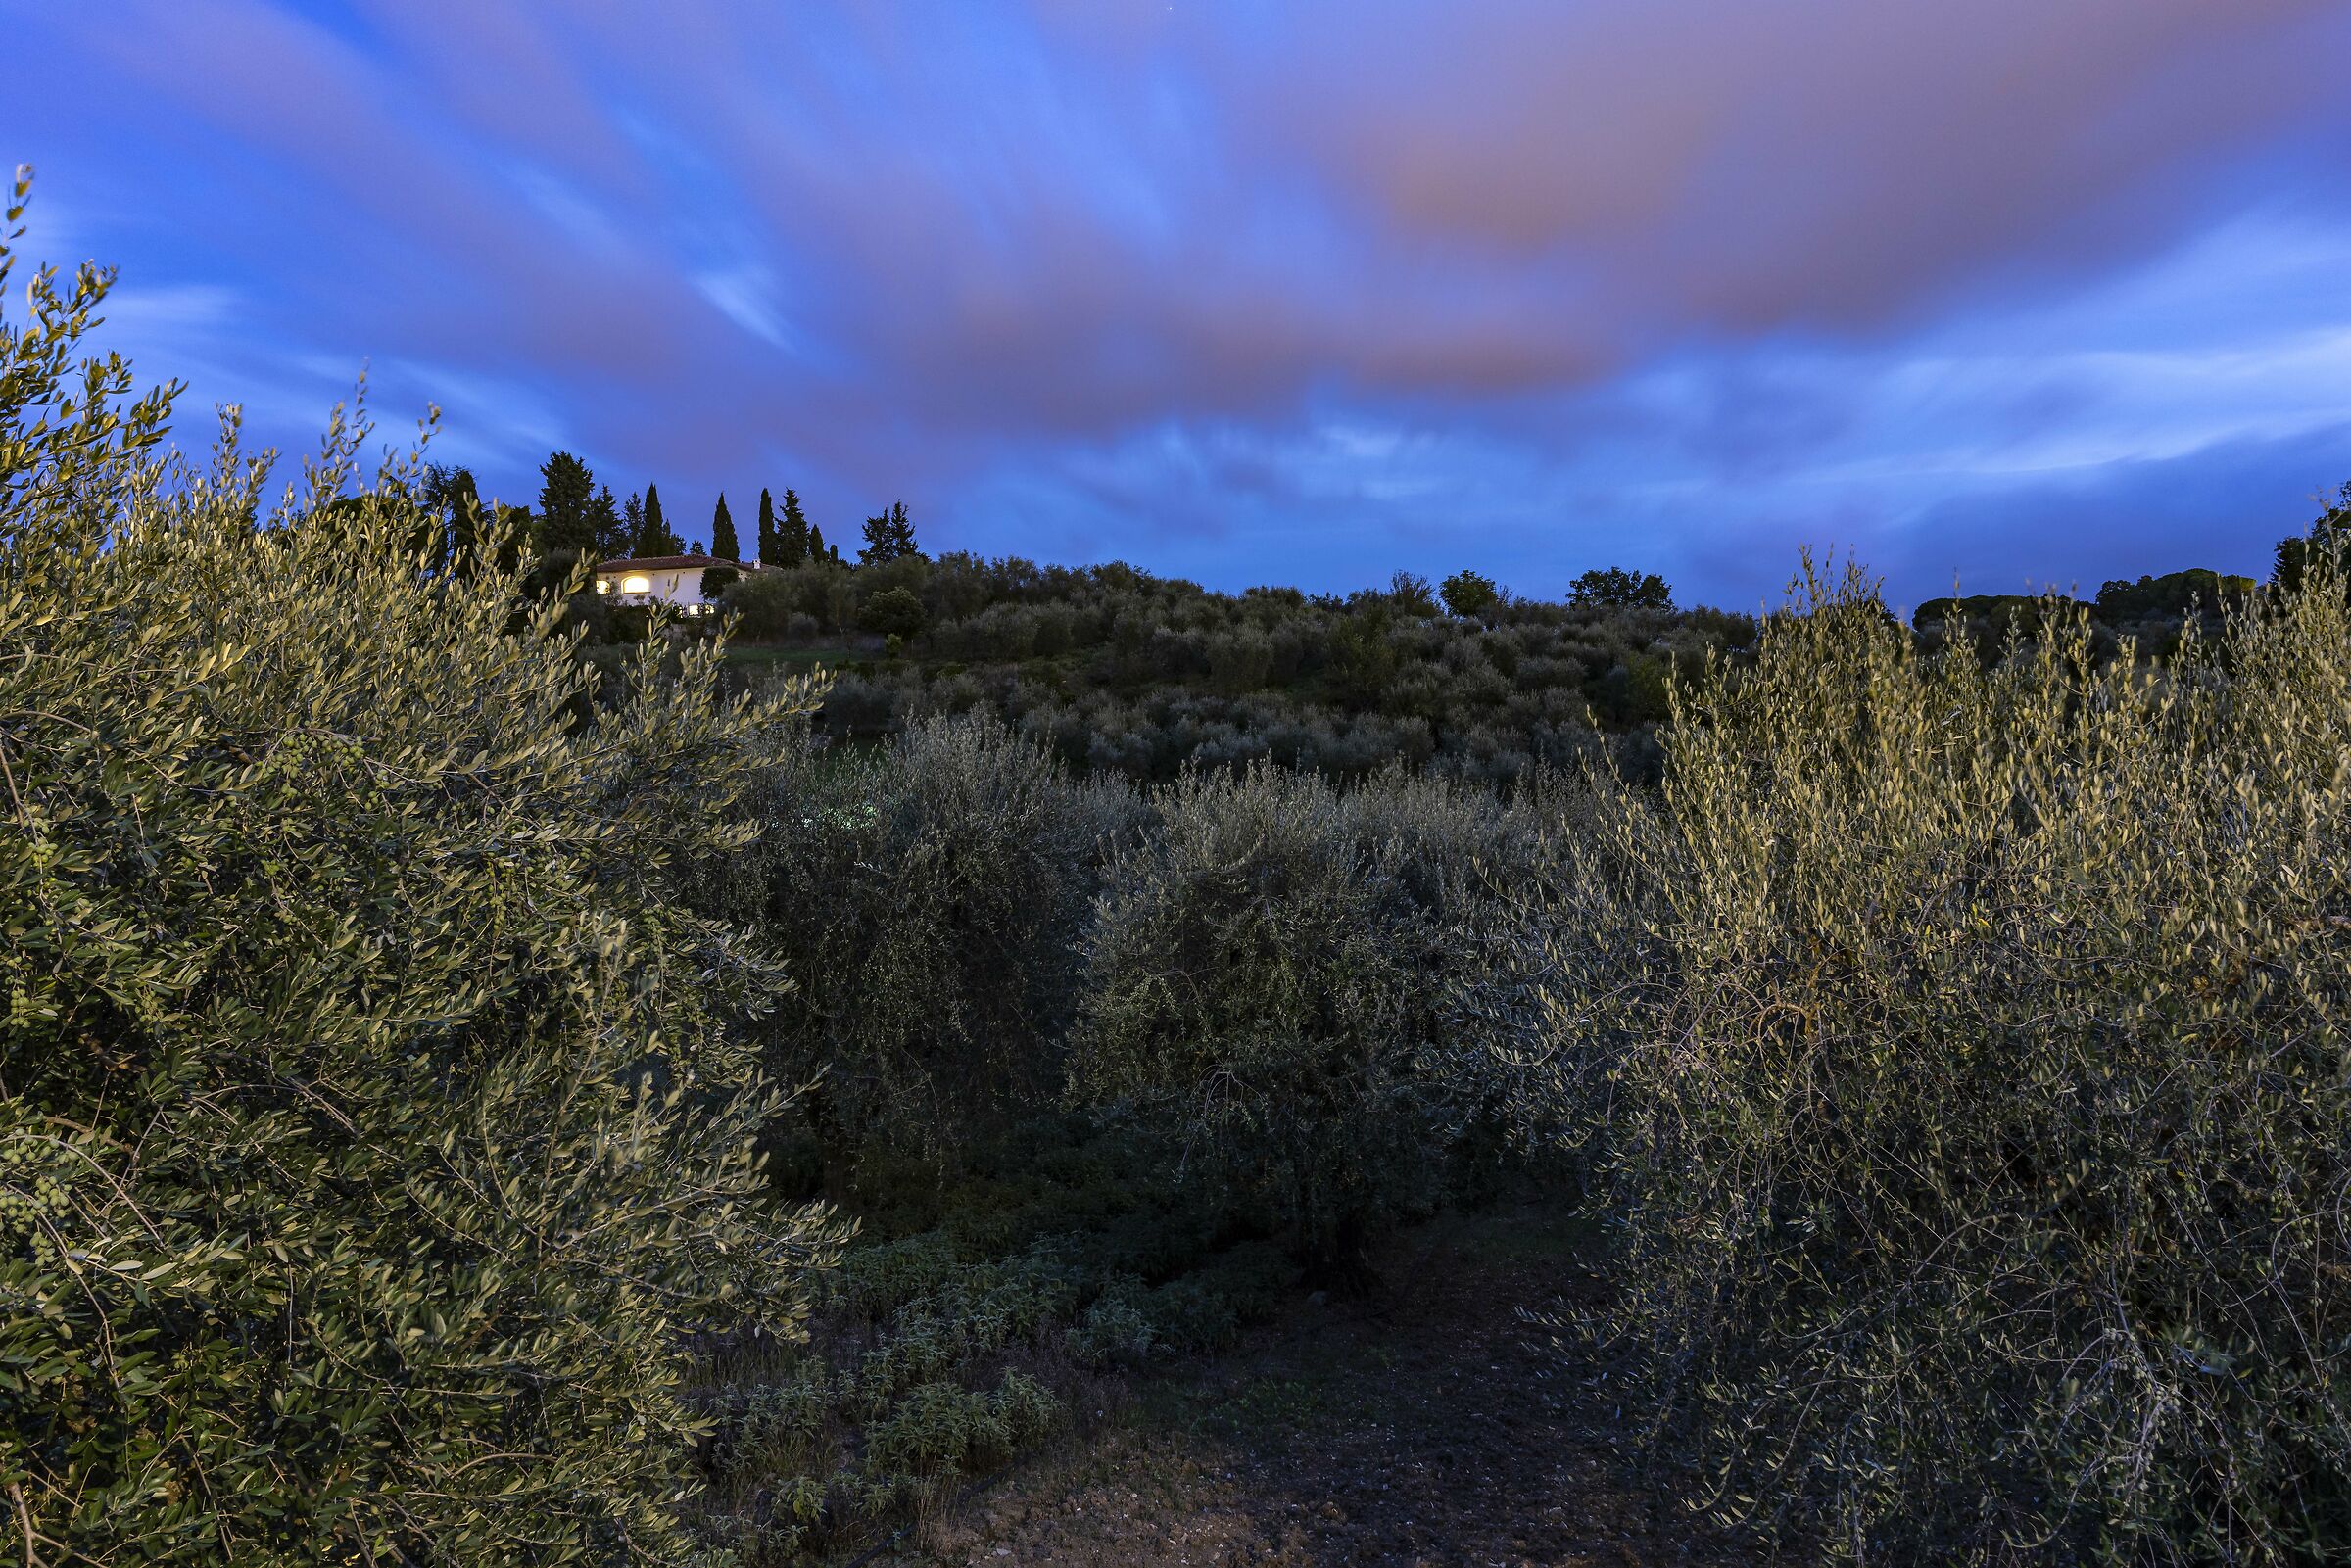 At night, olive trees in the background...